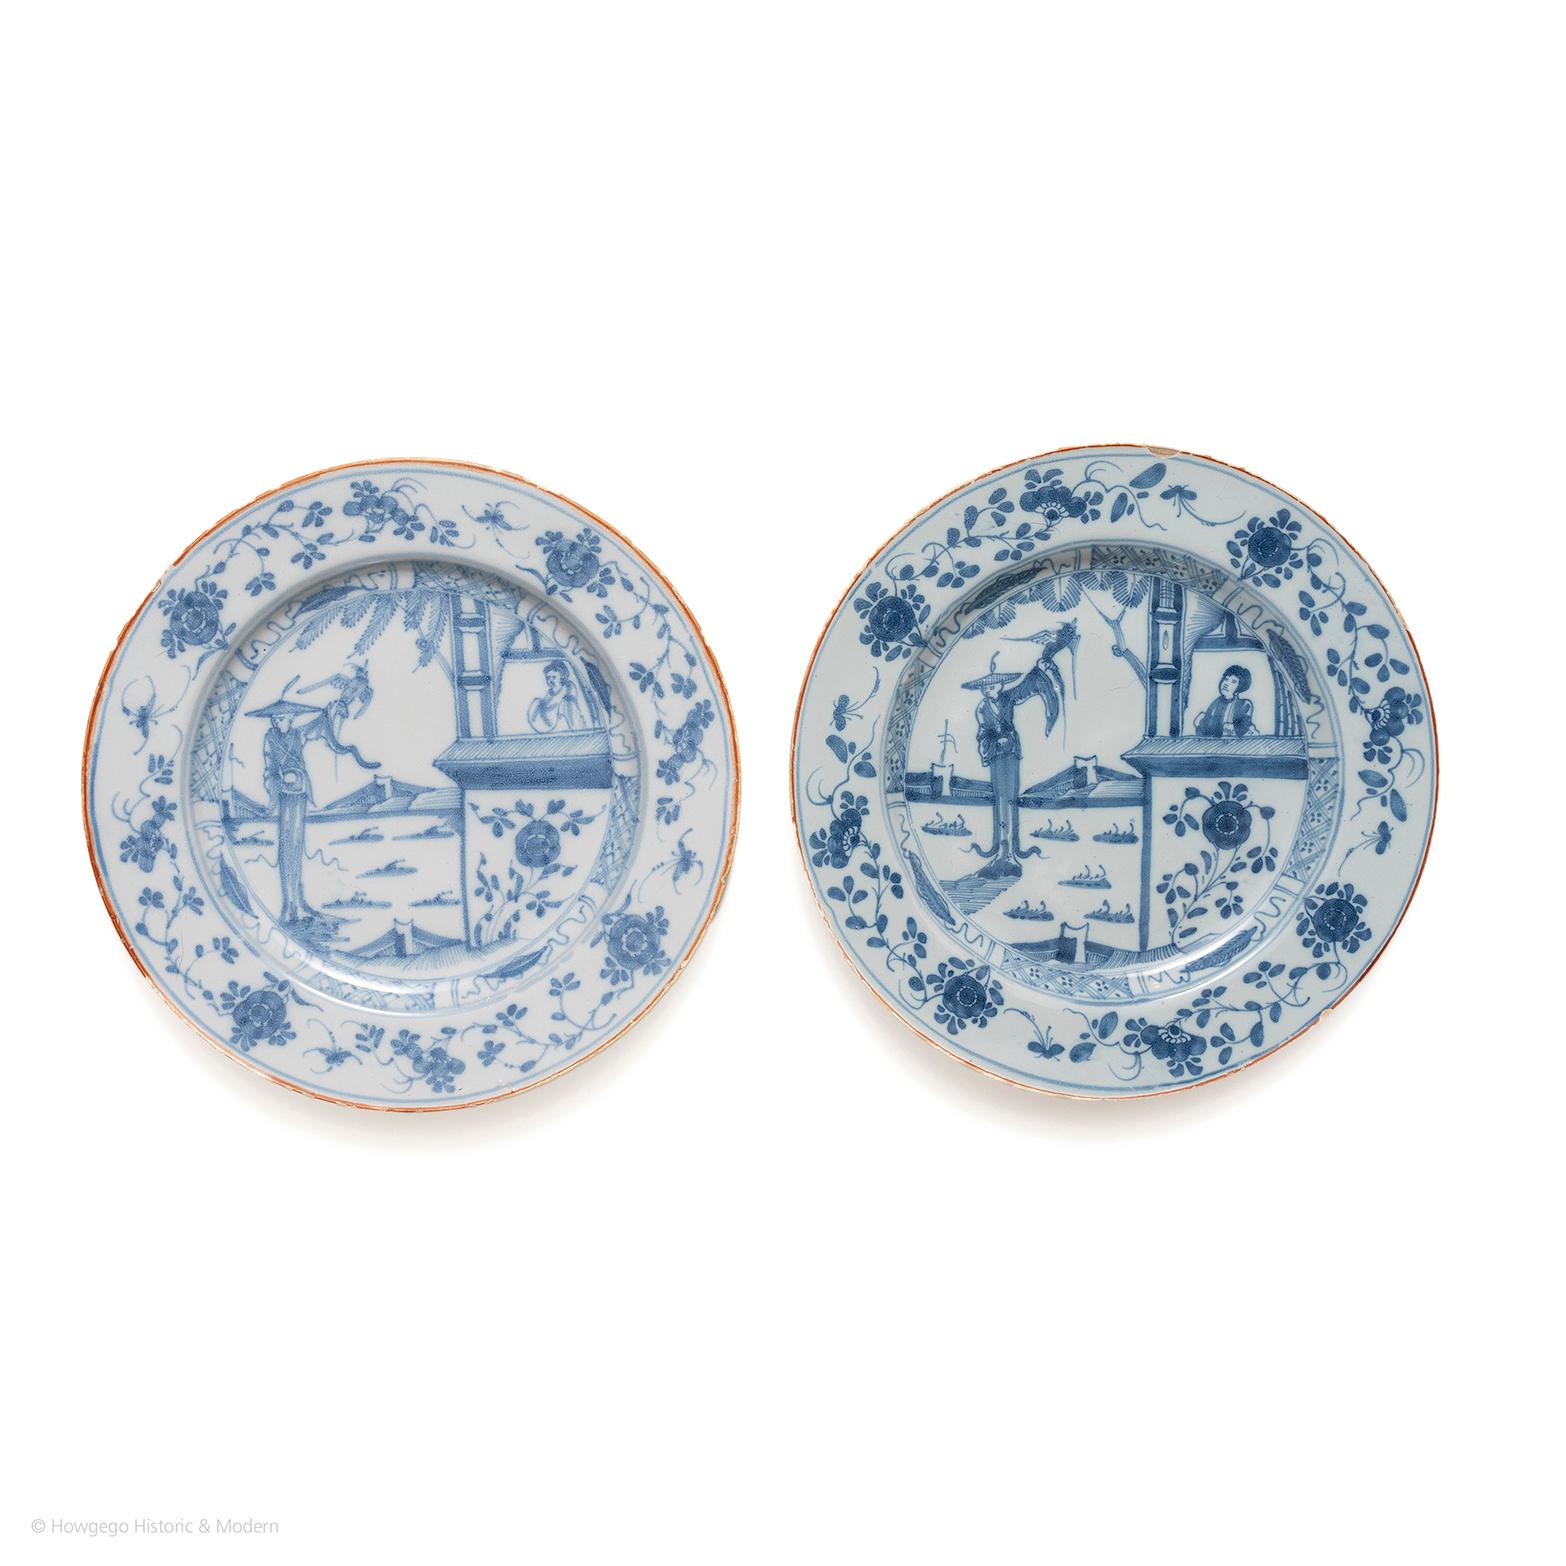 Delightful pair of chinoiserie plates evoking how exotic the East appeared to Europe and a sense of wonder it portrayed.

Painted with a chinoiserie scene of a tall lady standing in a garden holding an exotic bird with another lady watching from